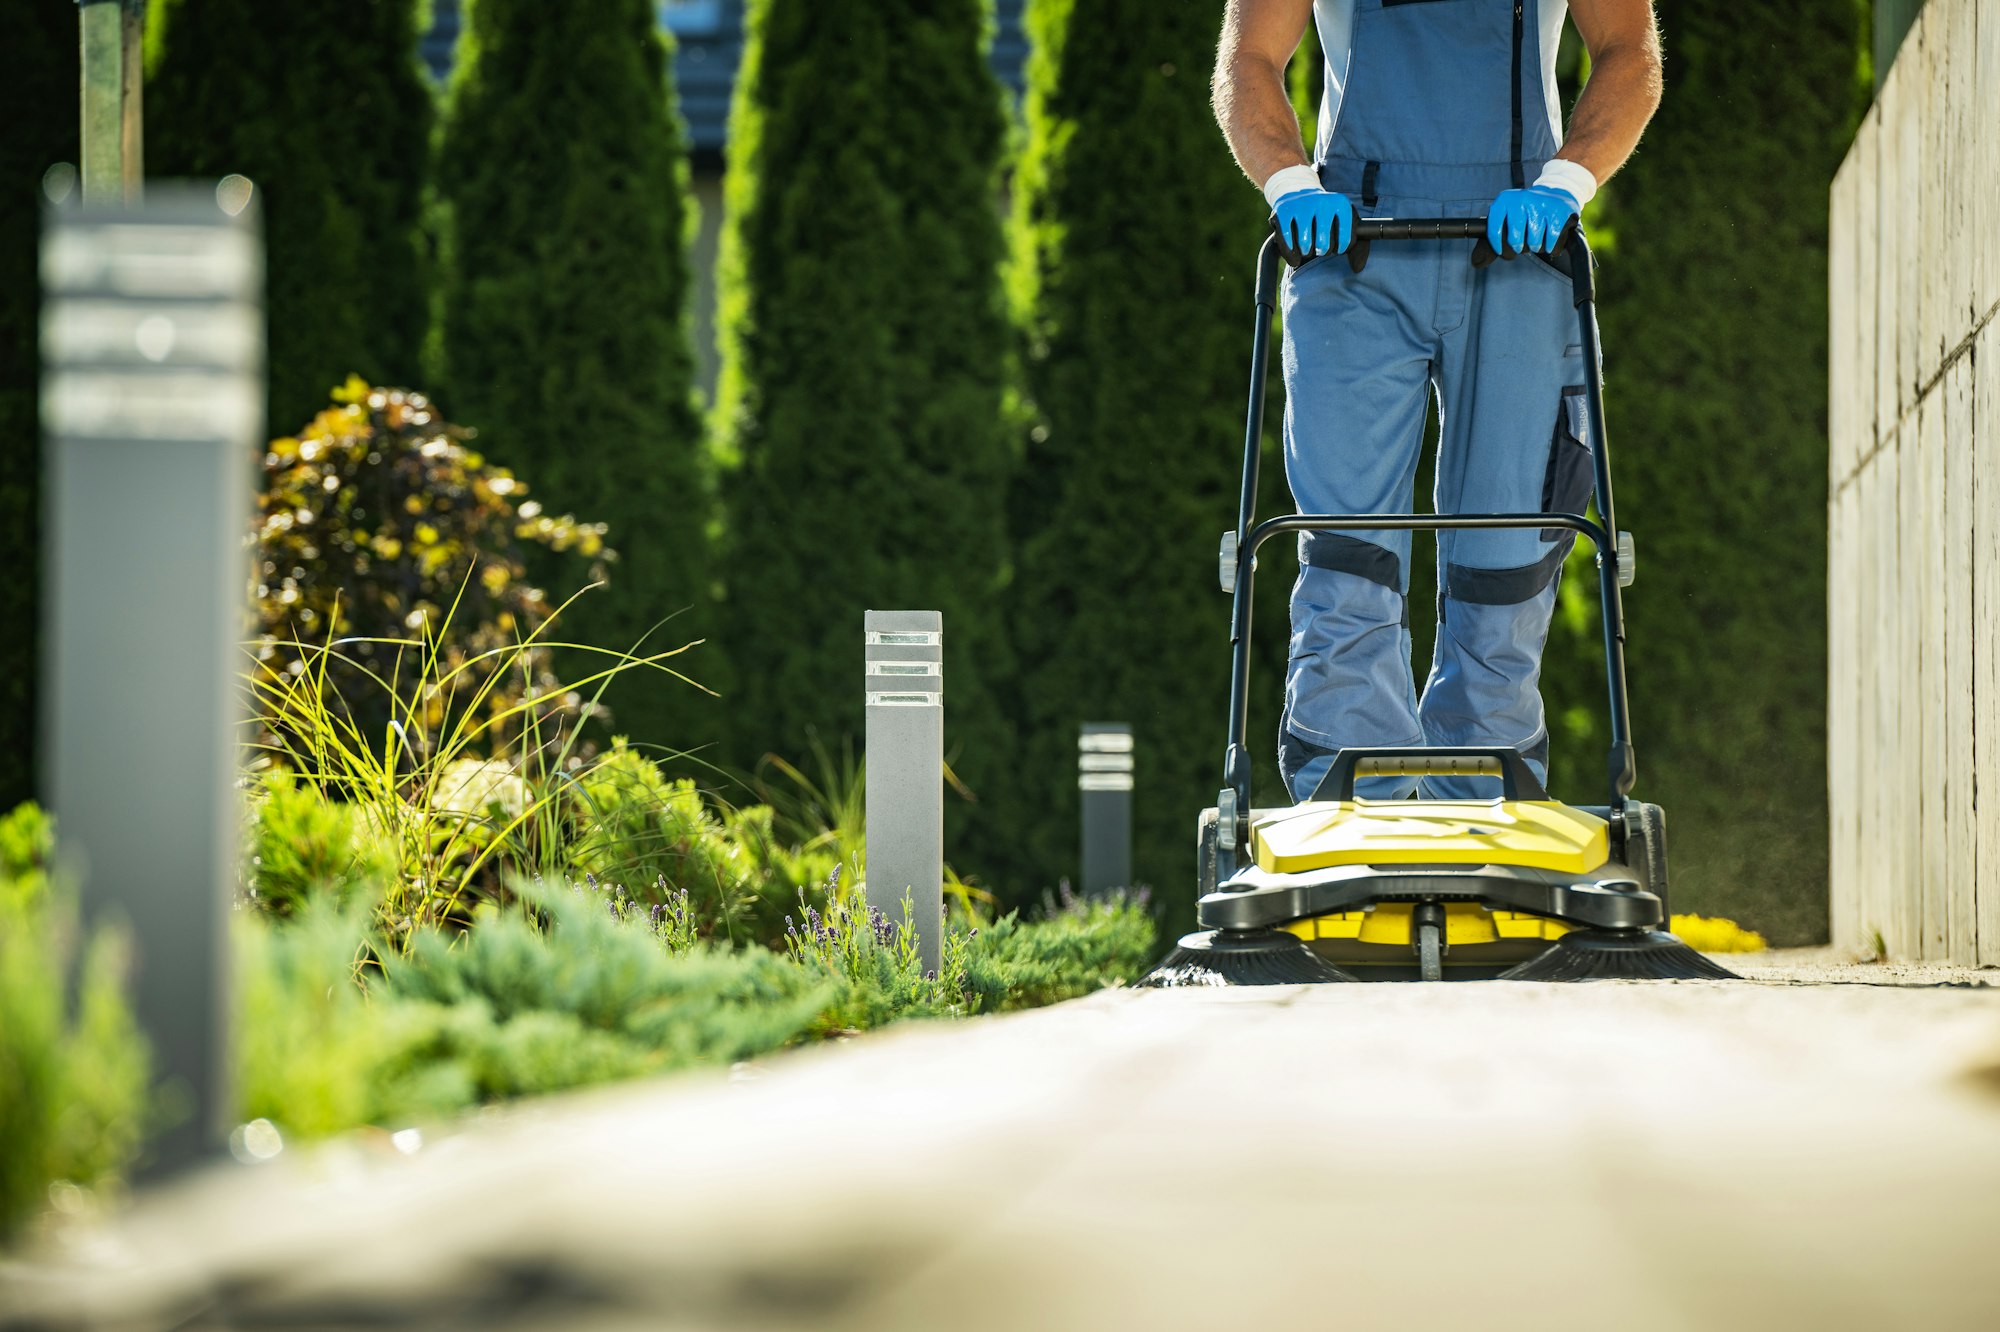 Landscaper Worker with Push Sweeper Cleaning Garden Pathway